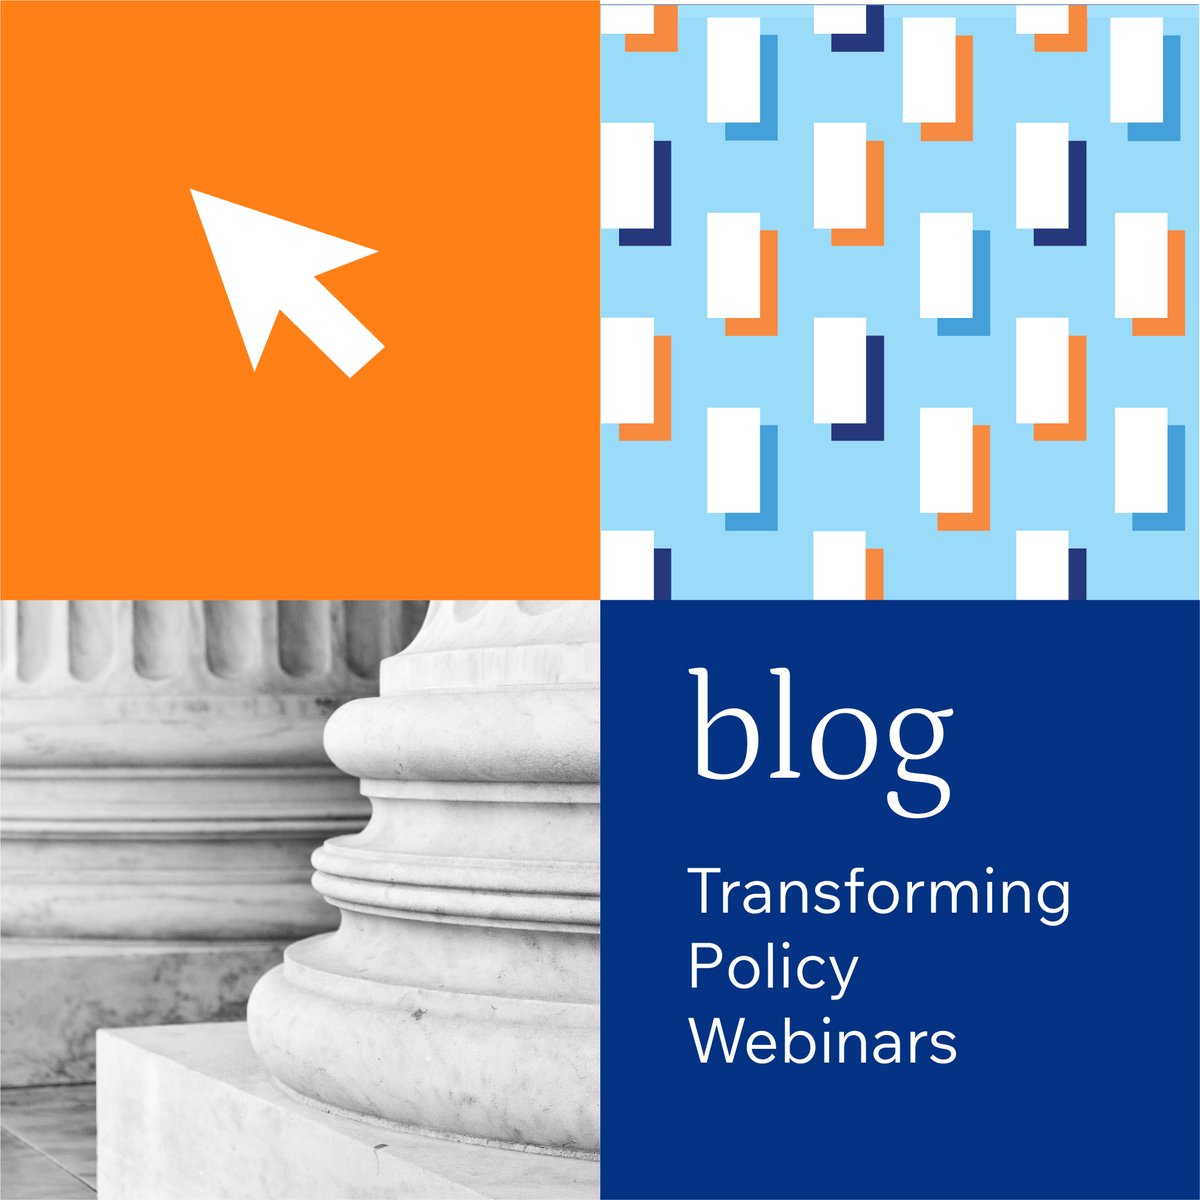 New on the GCCA Blog, learn more about the Transforming Policy webinars supporting patient advocacy groups to make colorectal cancer policy change in their communities. gcca.info/_Blog_Post_4_9… #colorectalcancer #transformingpolicy #GCCAblog